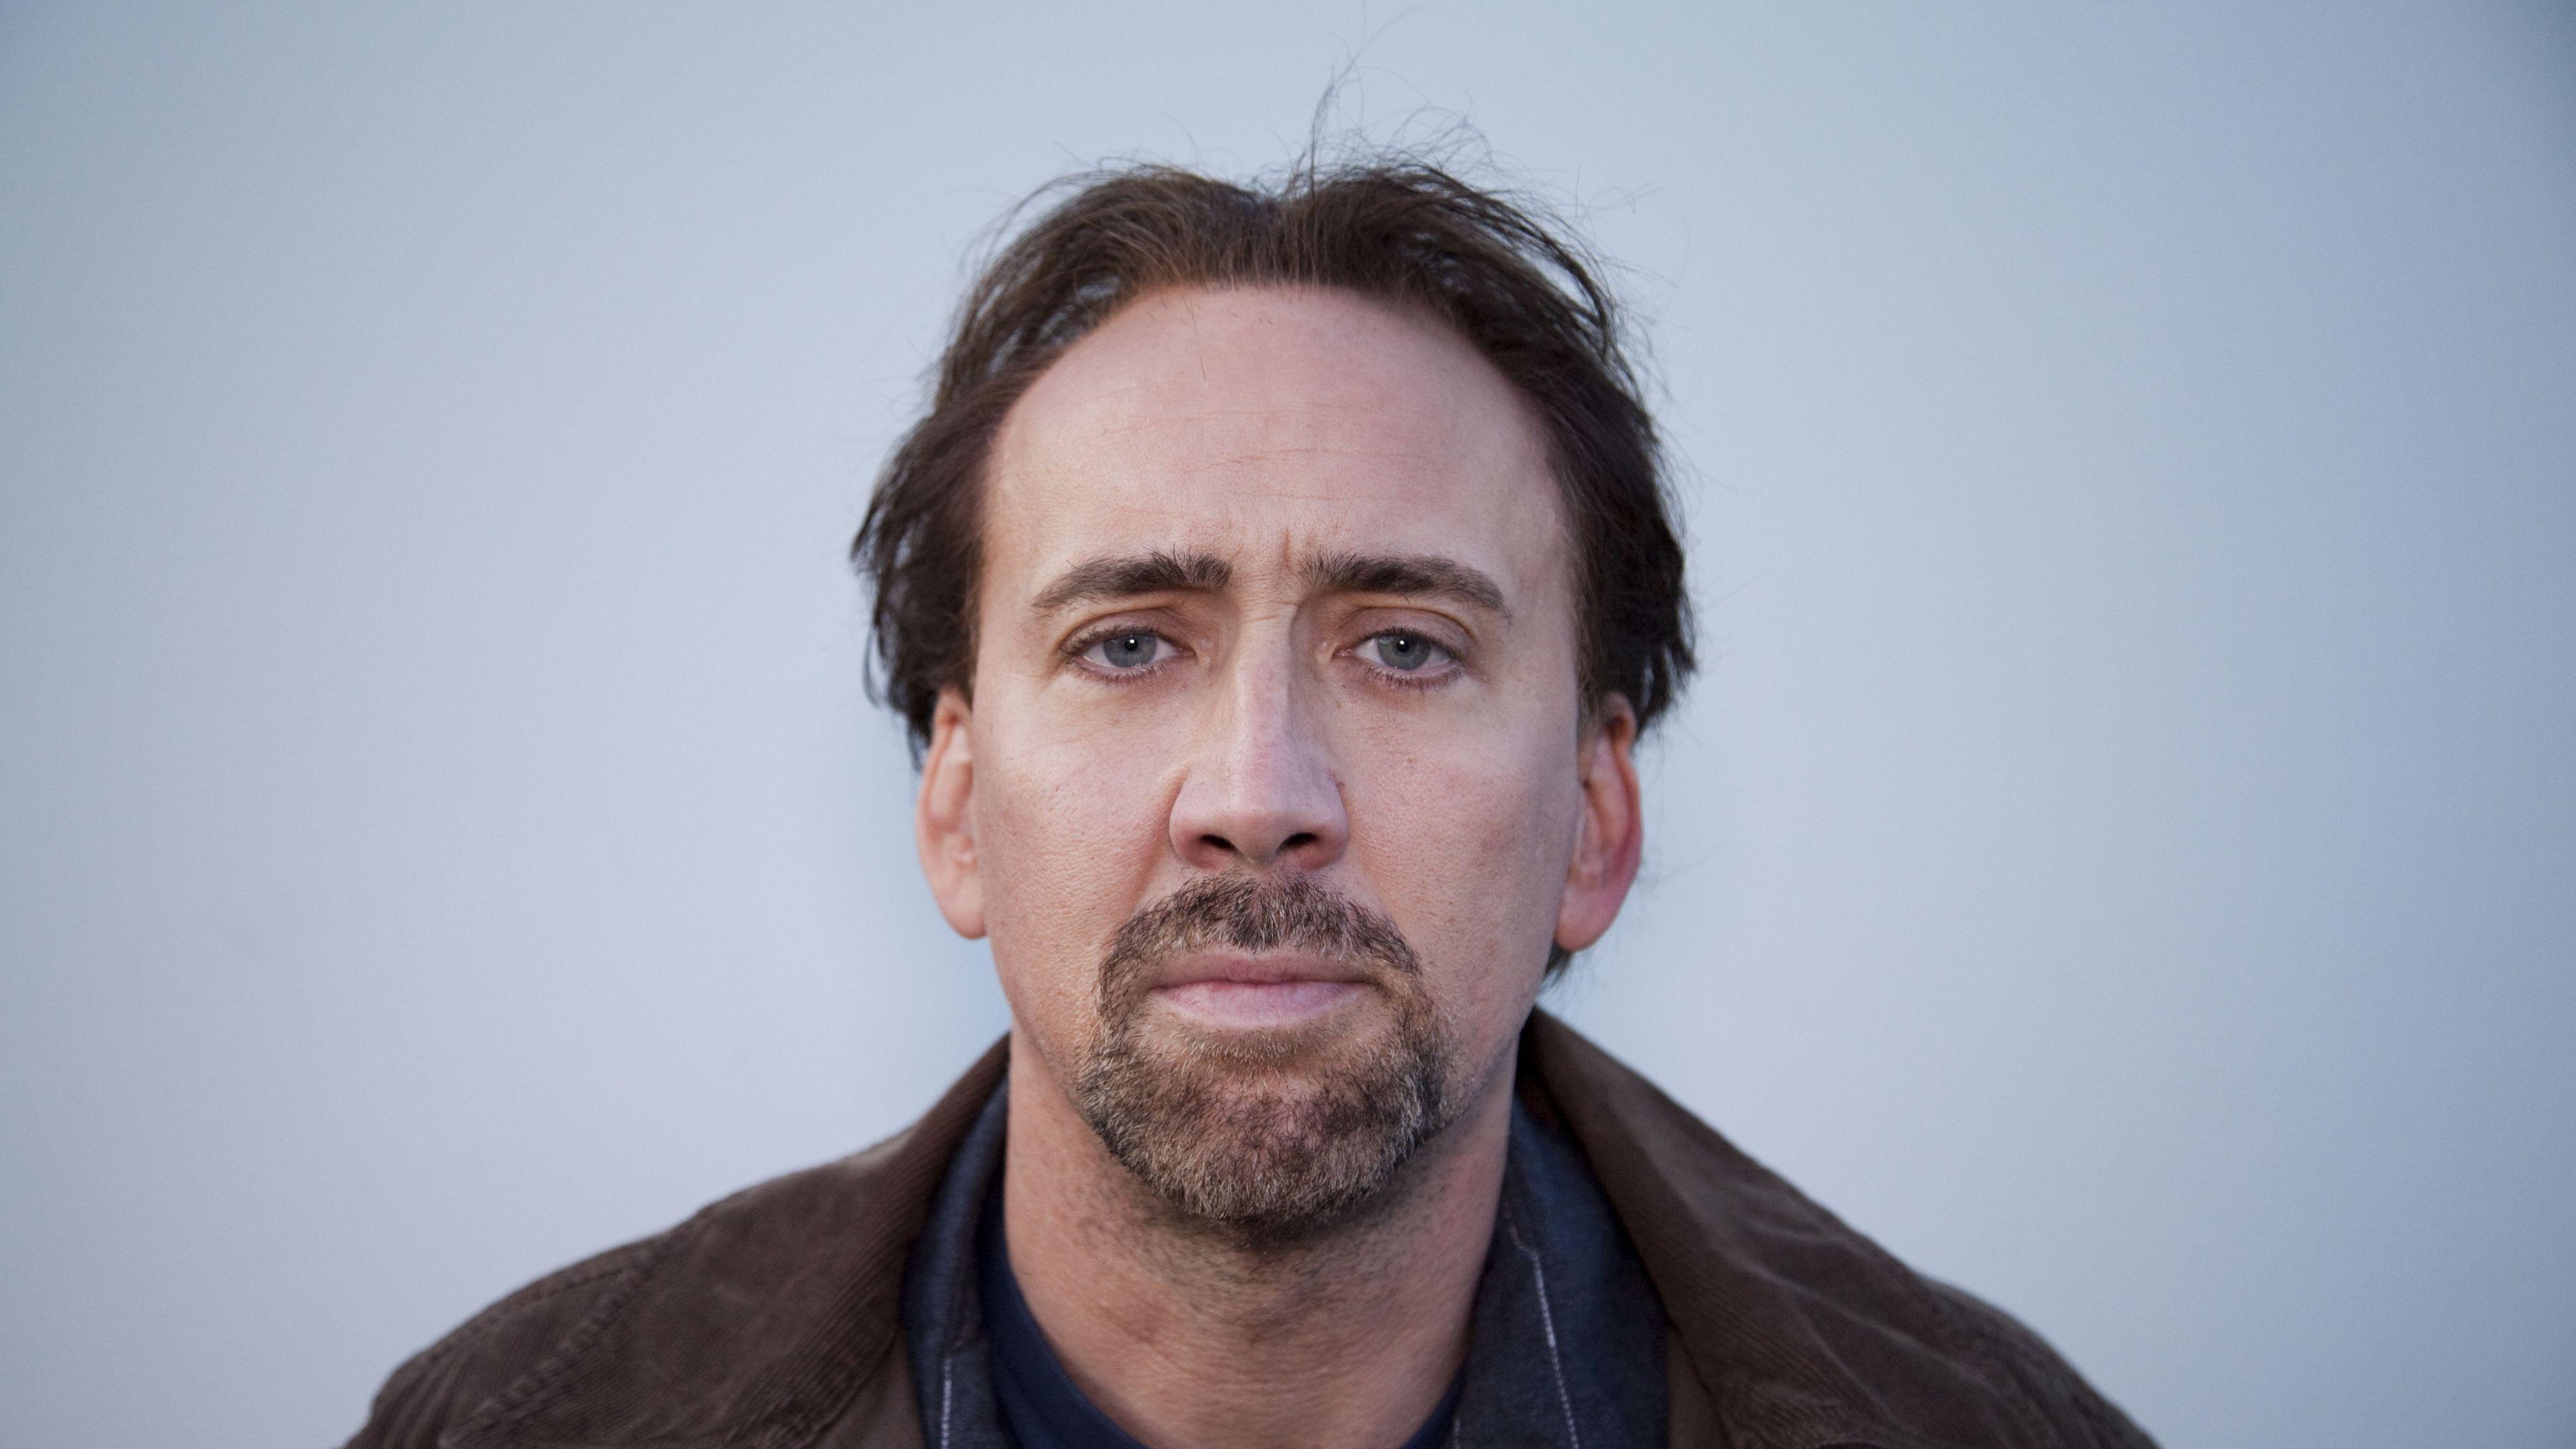 Nicolas Cage HD The Unbearable Weight of Massive Talent Wallpapers  HD  Wallpapers  ID 104844